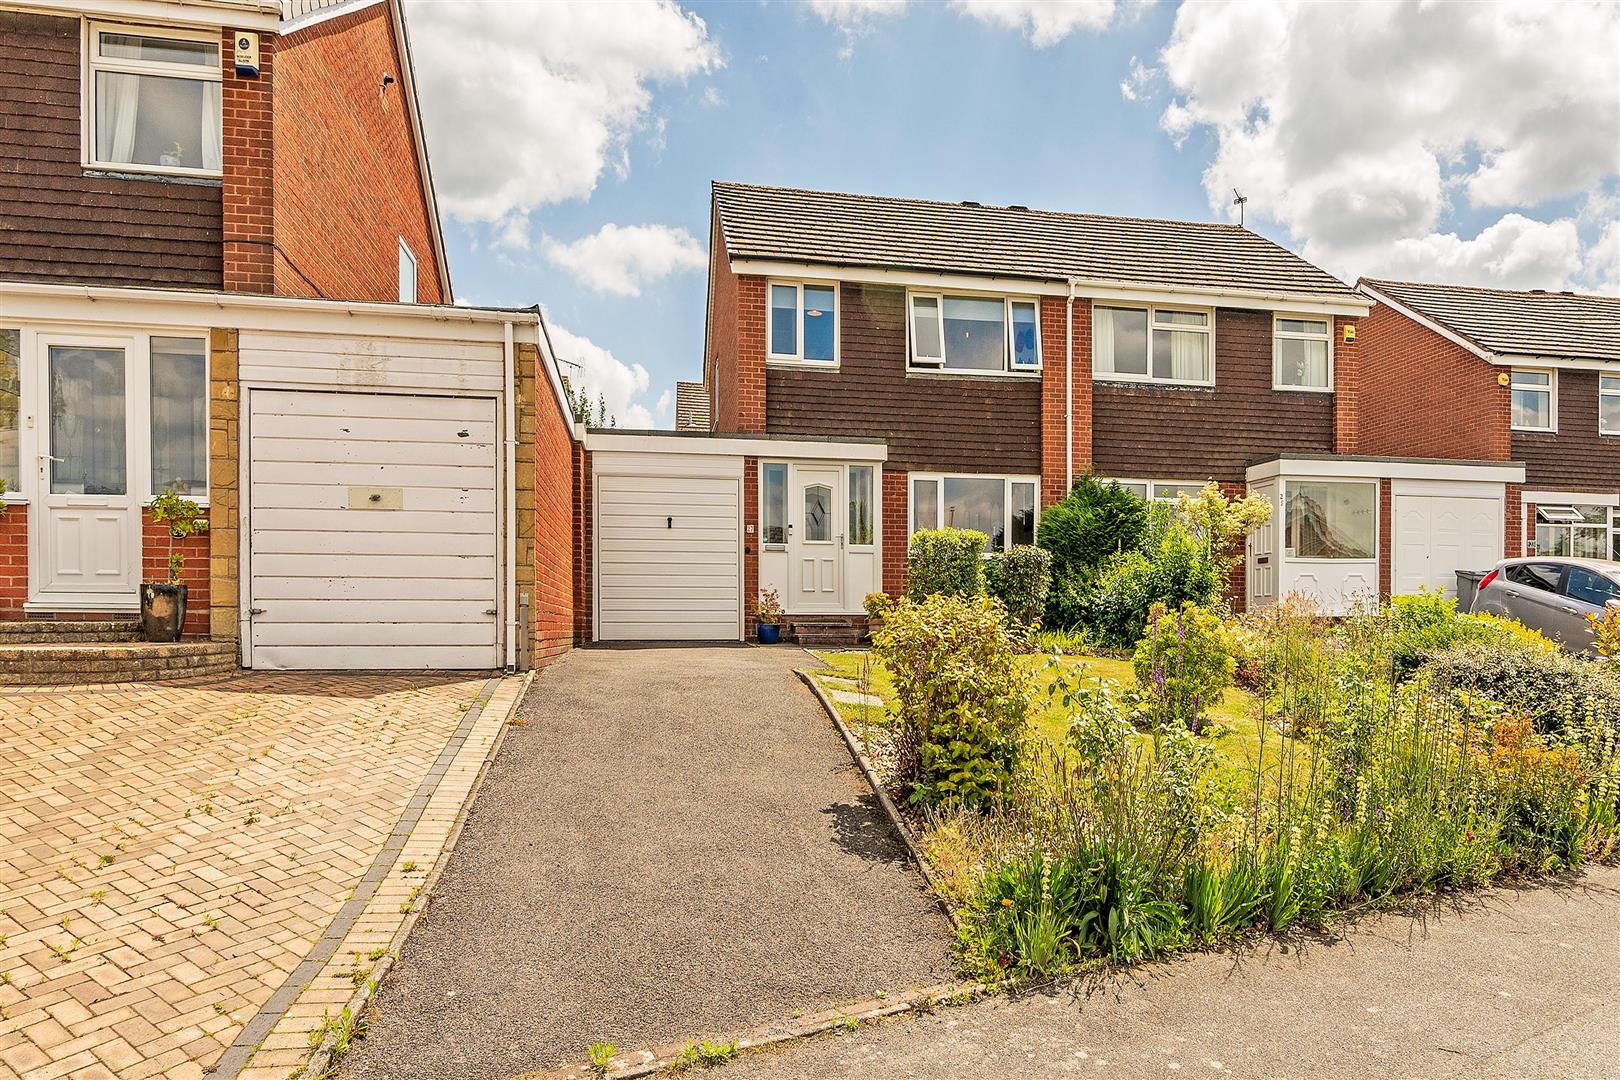 3 bed  for sale in Cheswick Way, Solihull, B90 